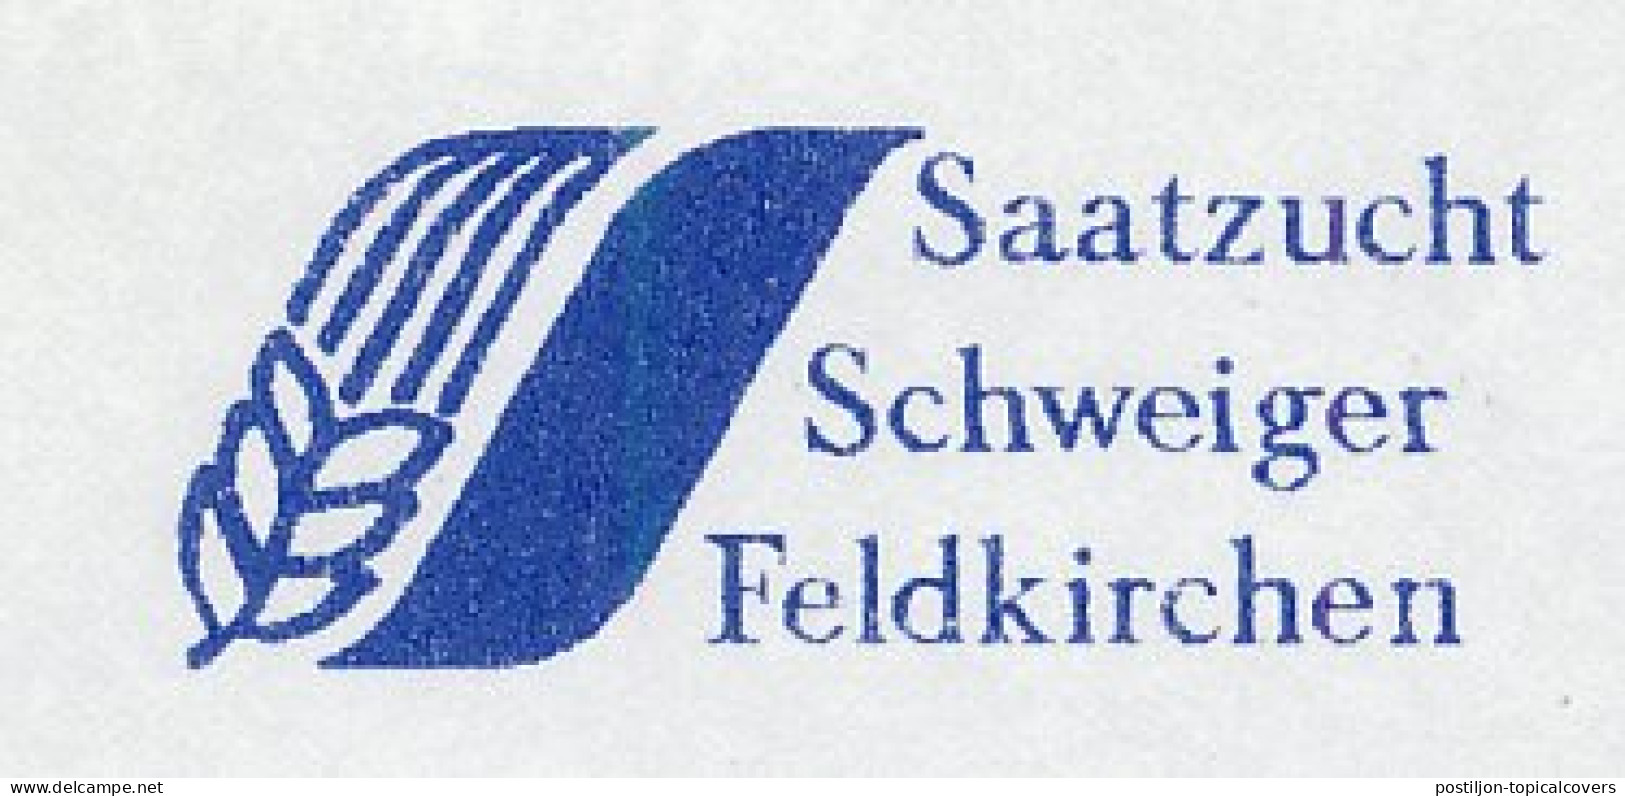 Meter Cut Germany 2004 Seed Production - Agriculture